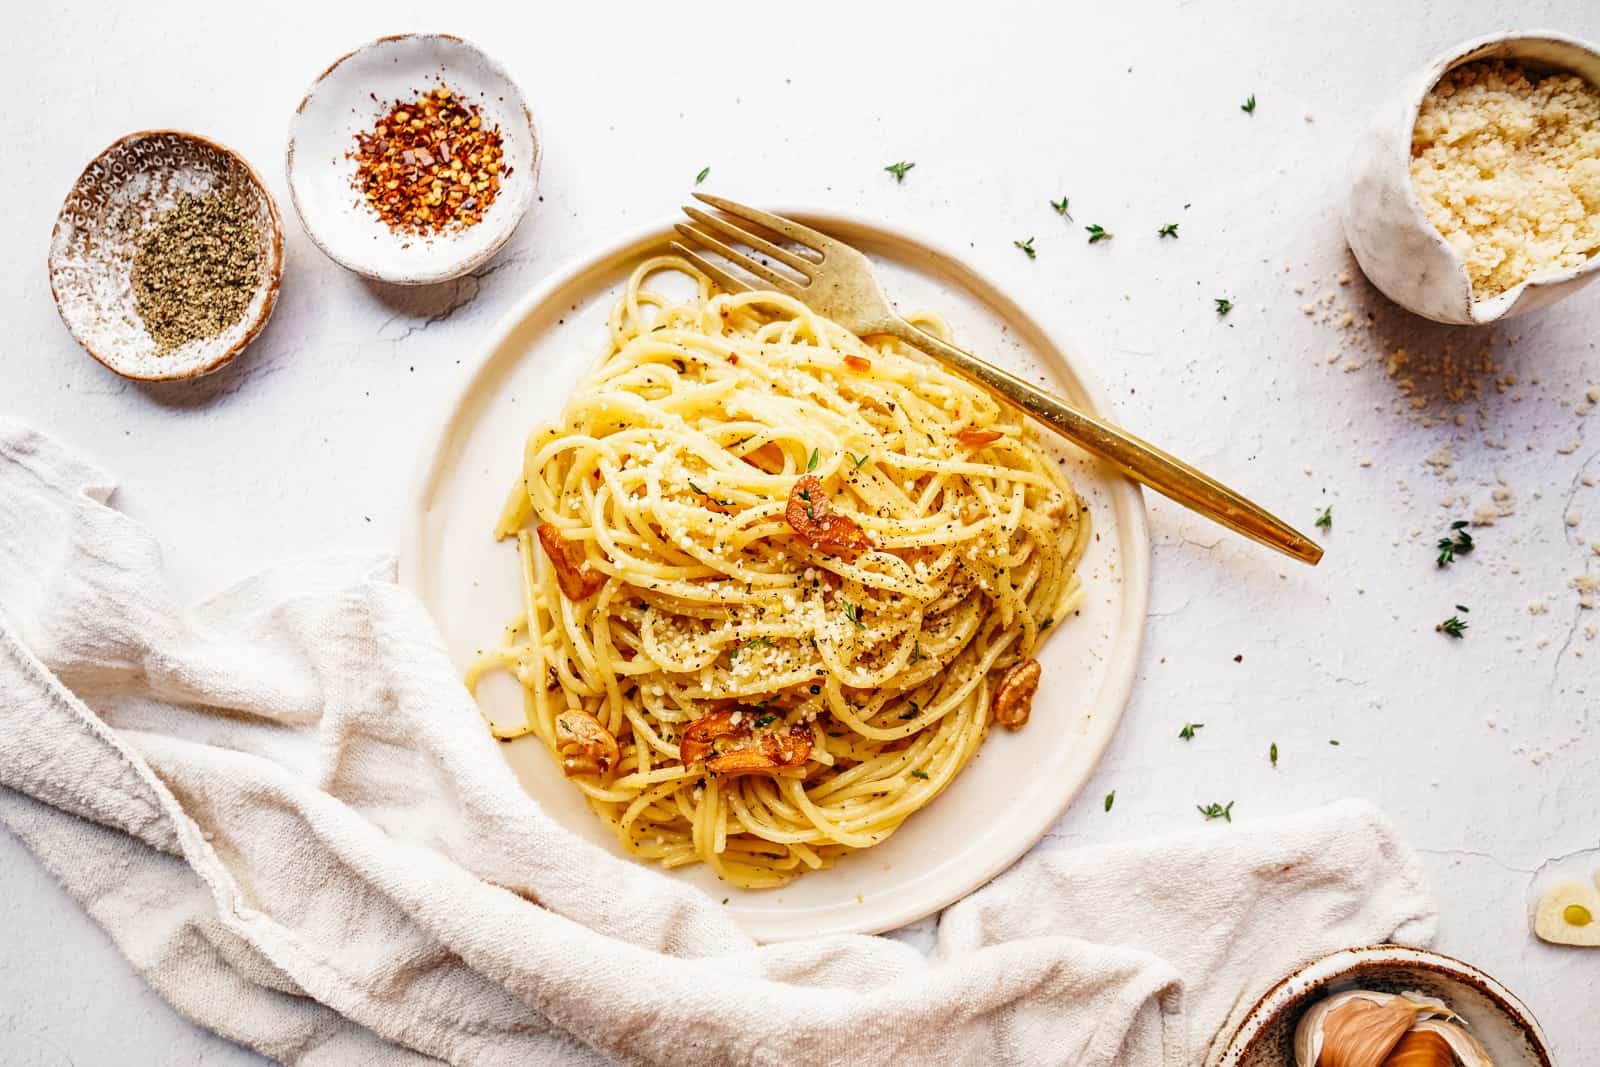 Plate with garlic and oil pasta